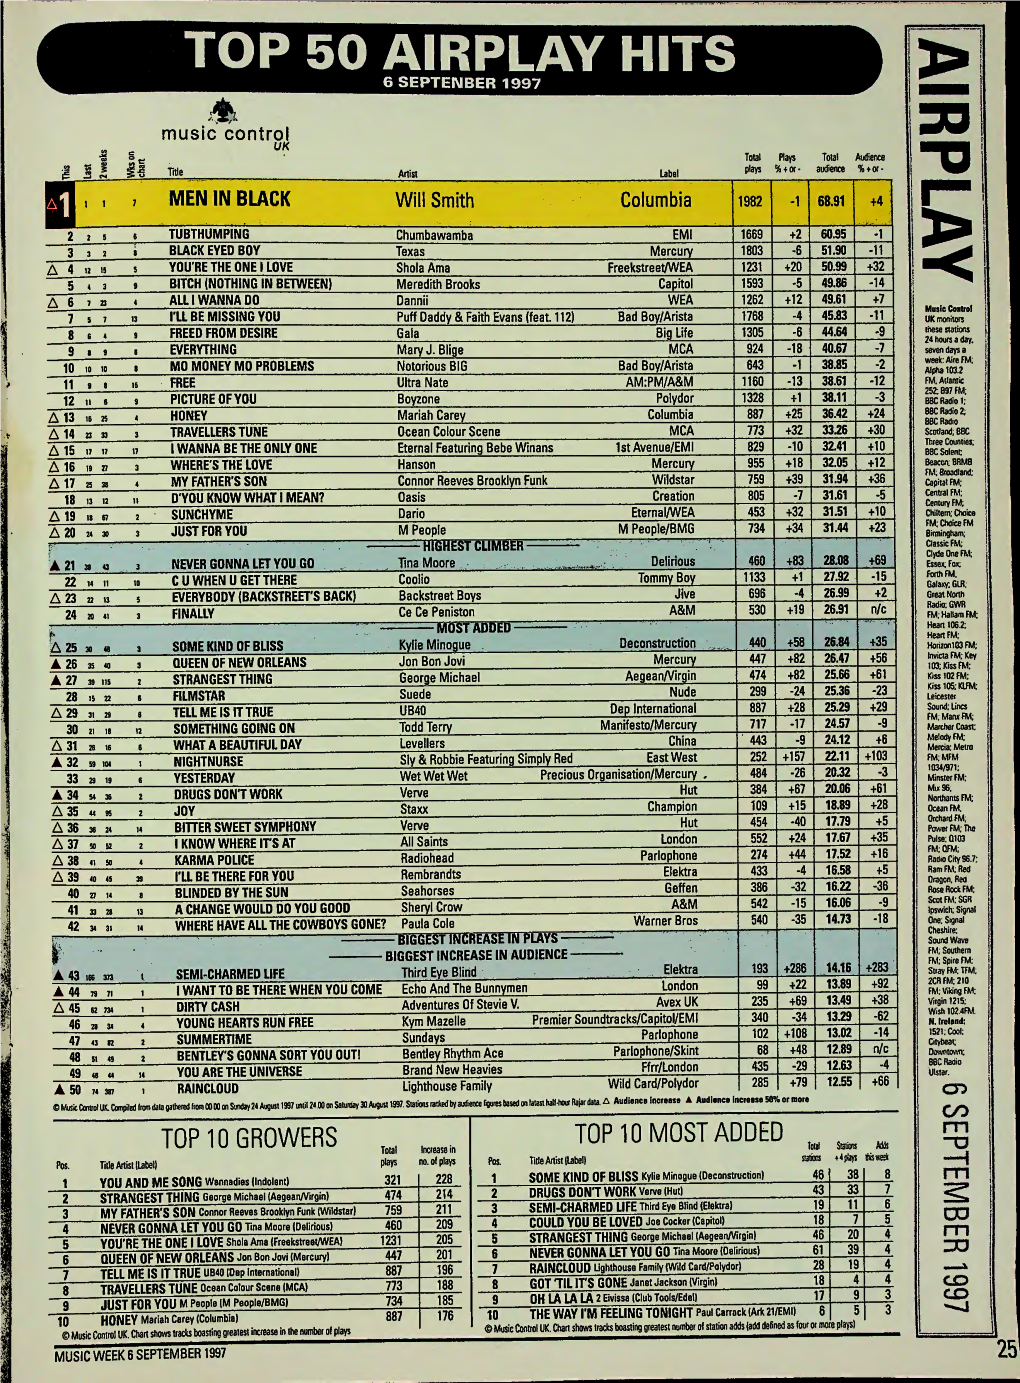 TOP 50 AIRPLAY HITS 6 SEPTENBER 1997 Music Control